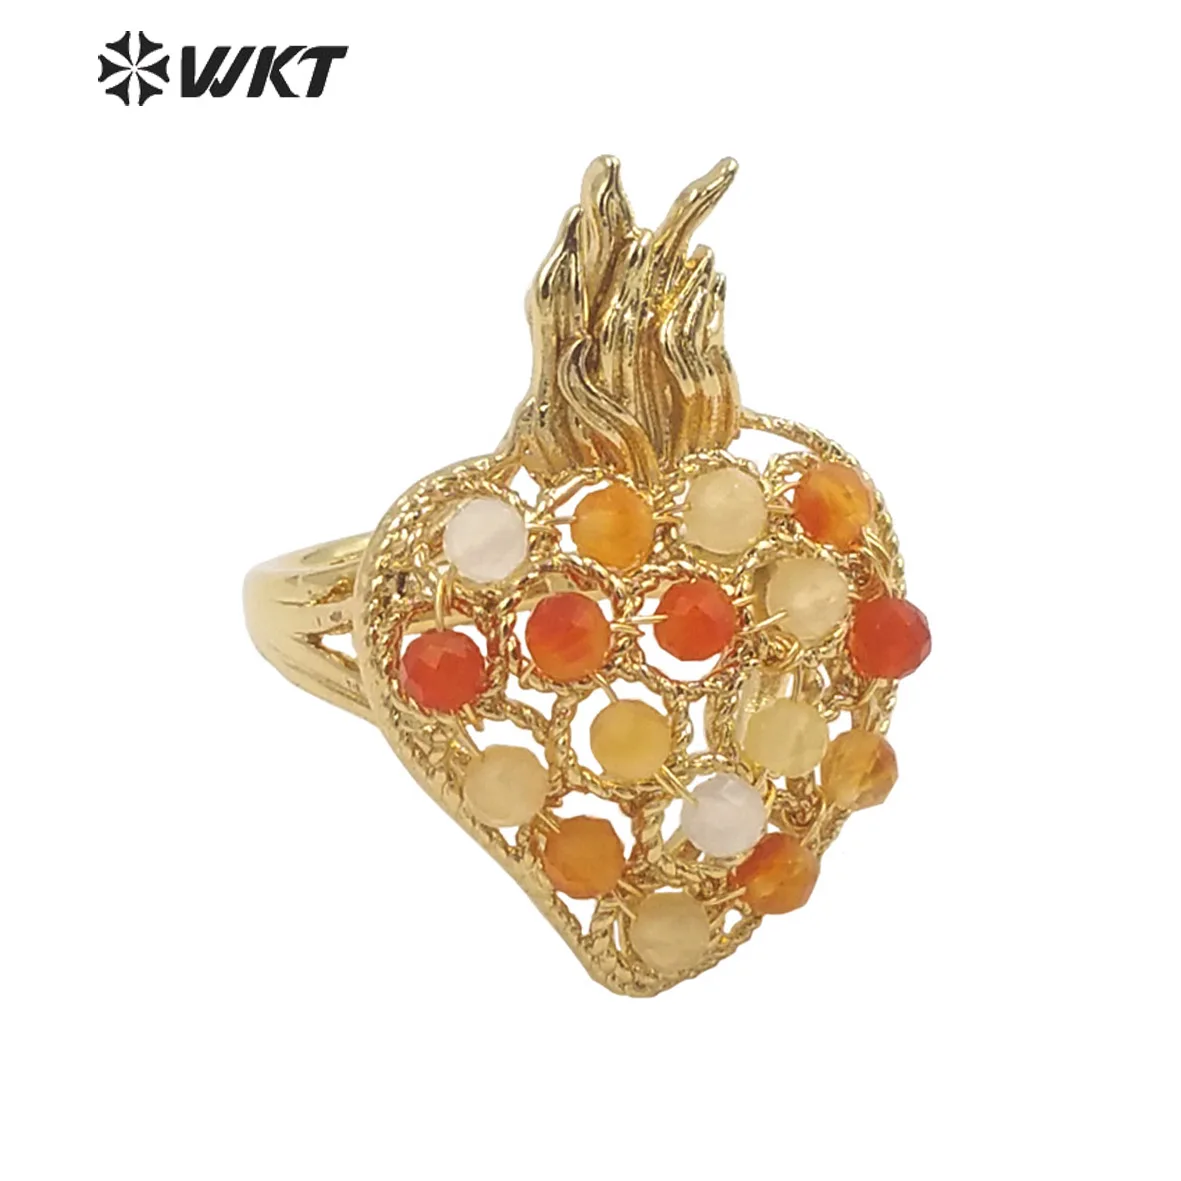 

WT-R454 WKT New Design 18k Gold Plated Handmade Gemstone Fire Torch Ring Natural Precious Birthday Stone Gorgeous Decorated